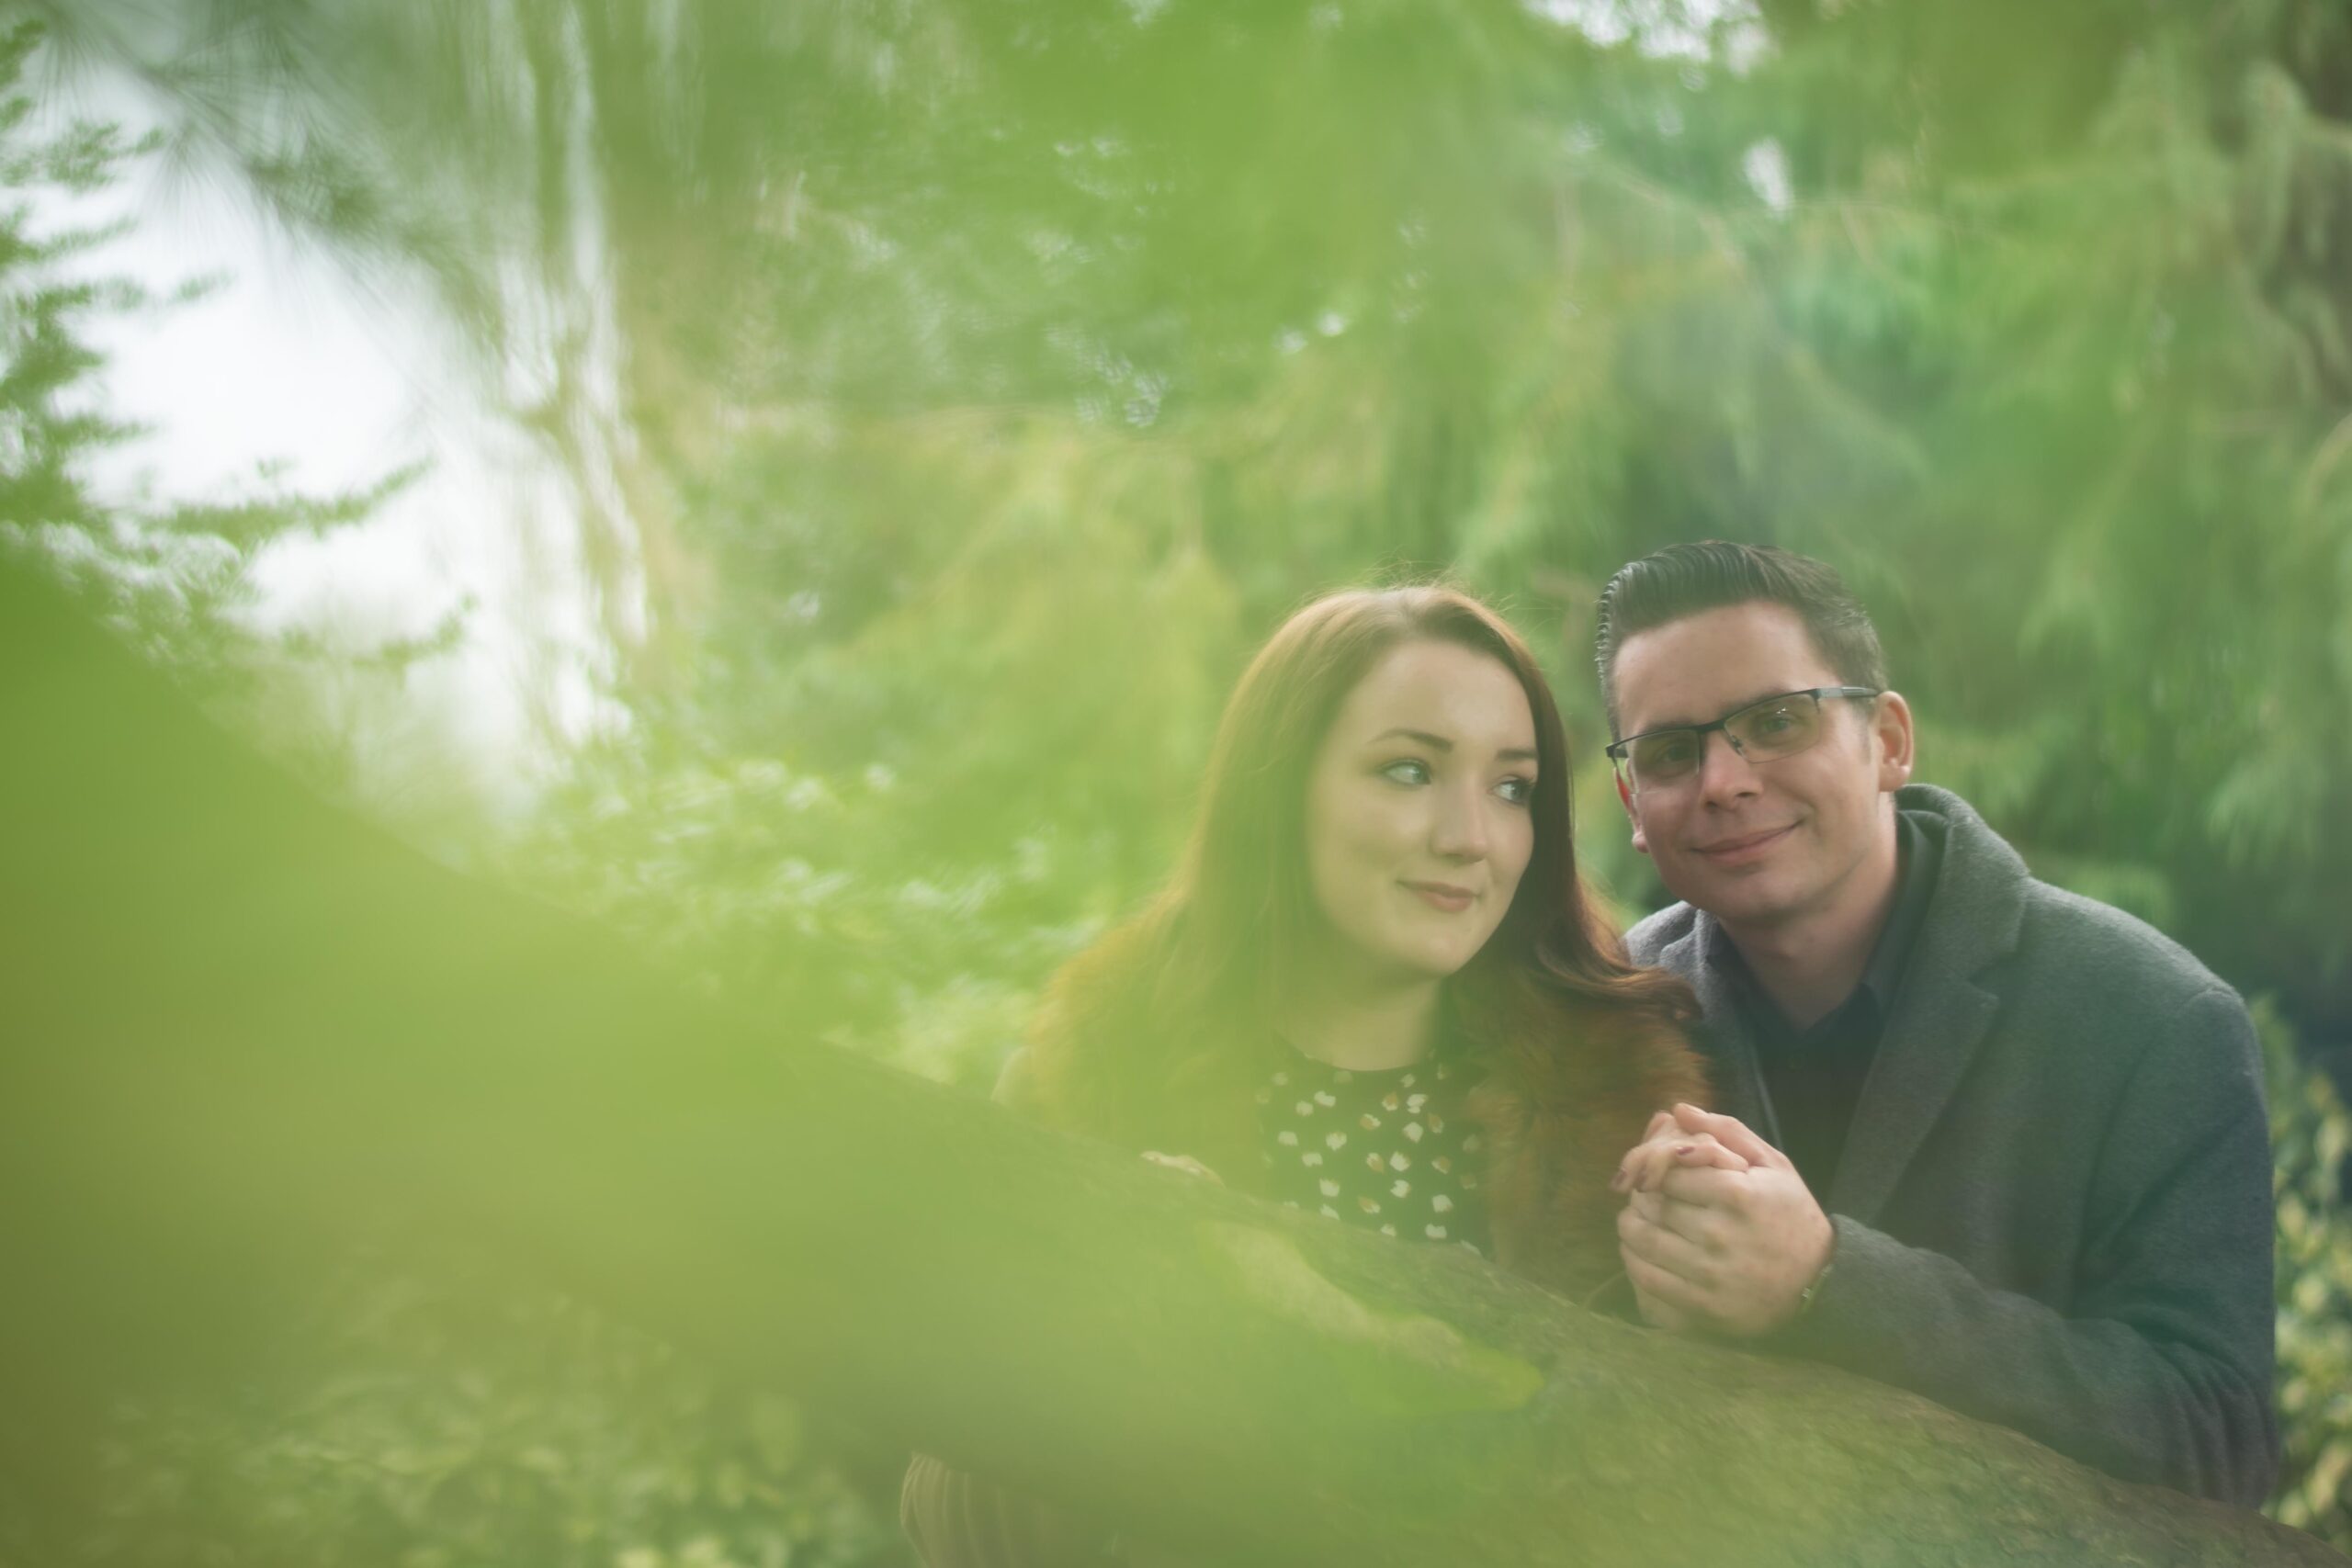 Oxford engagement shoot